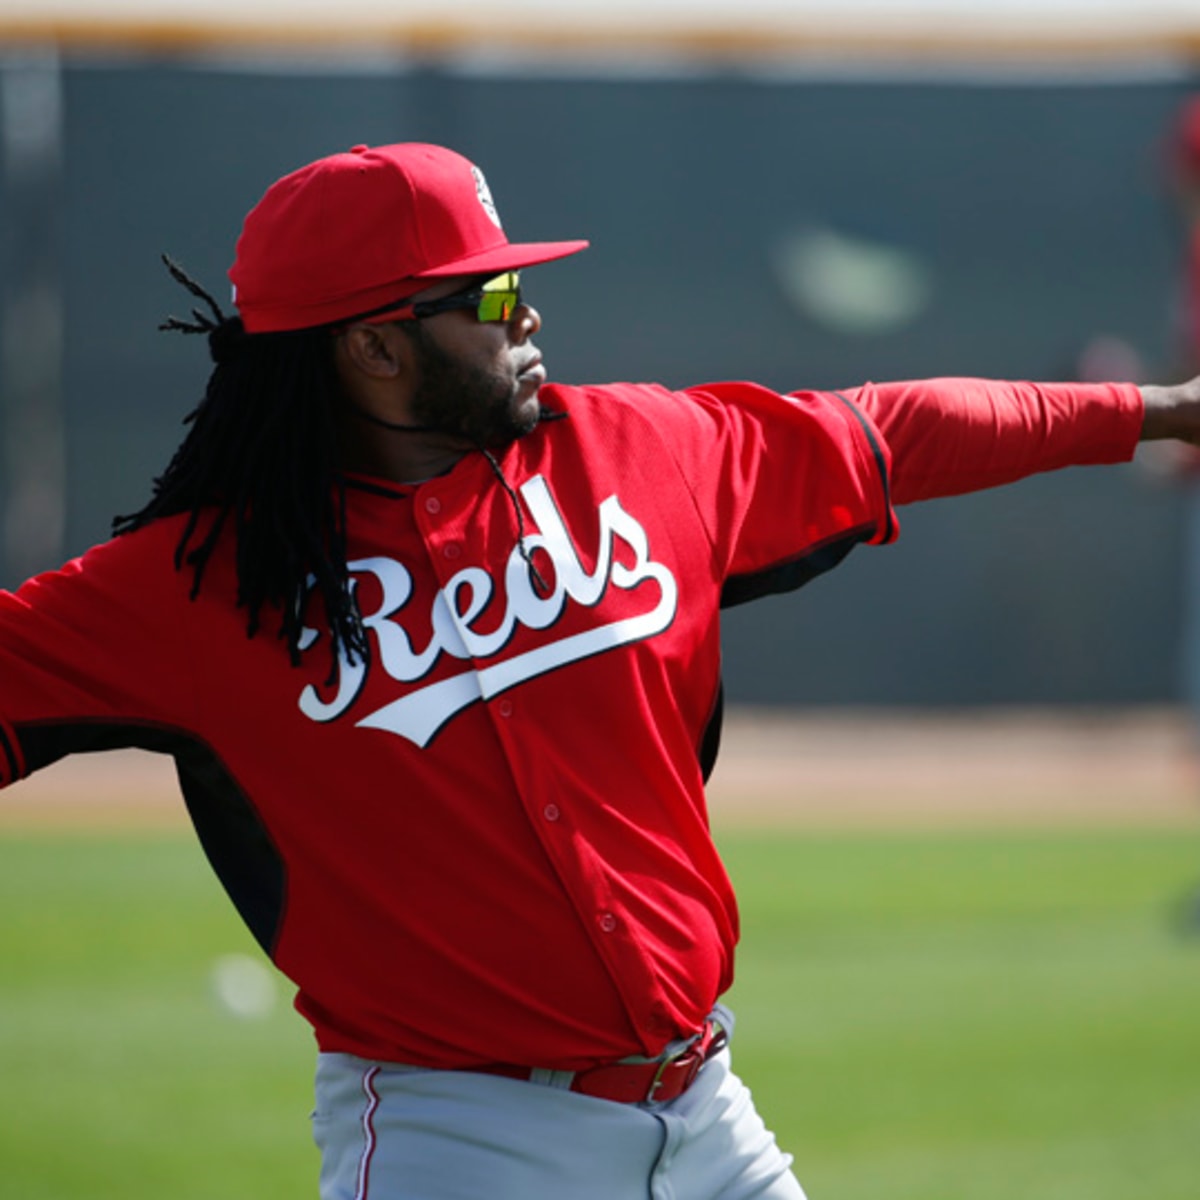 Cincinnati Reds' Johnny Cueto This Year's NL Cy Young?